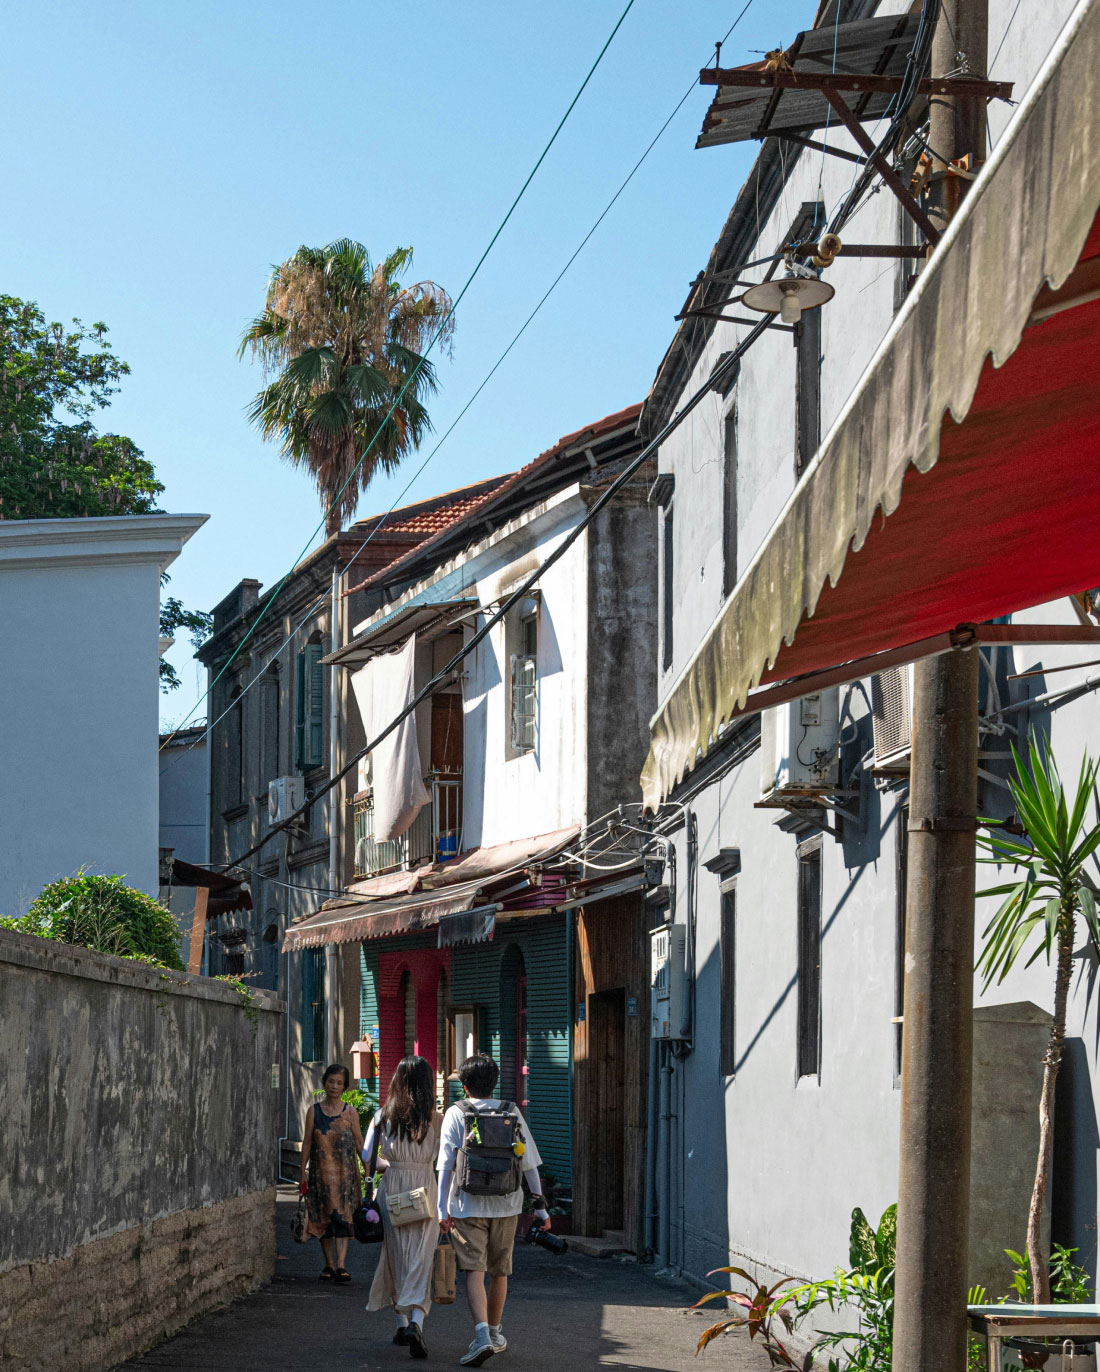 A narrow street with old, multi-story buildings under a bright blue sky. People walk along the path, with some greenery visible at the sides and a palm tree in the distance. The buildings have a mix of red and green doors, and an awning hangs from one building.